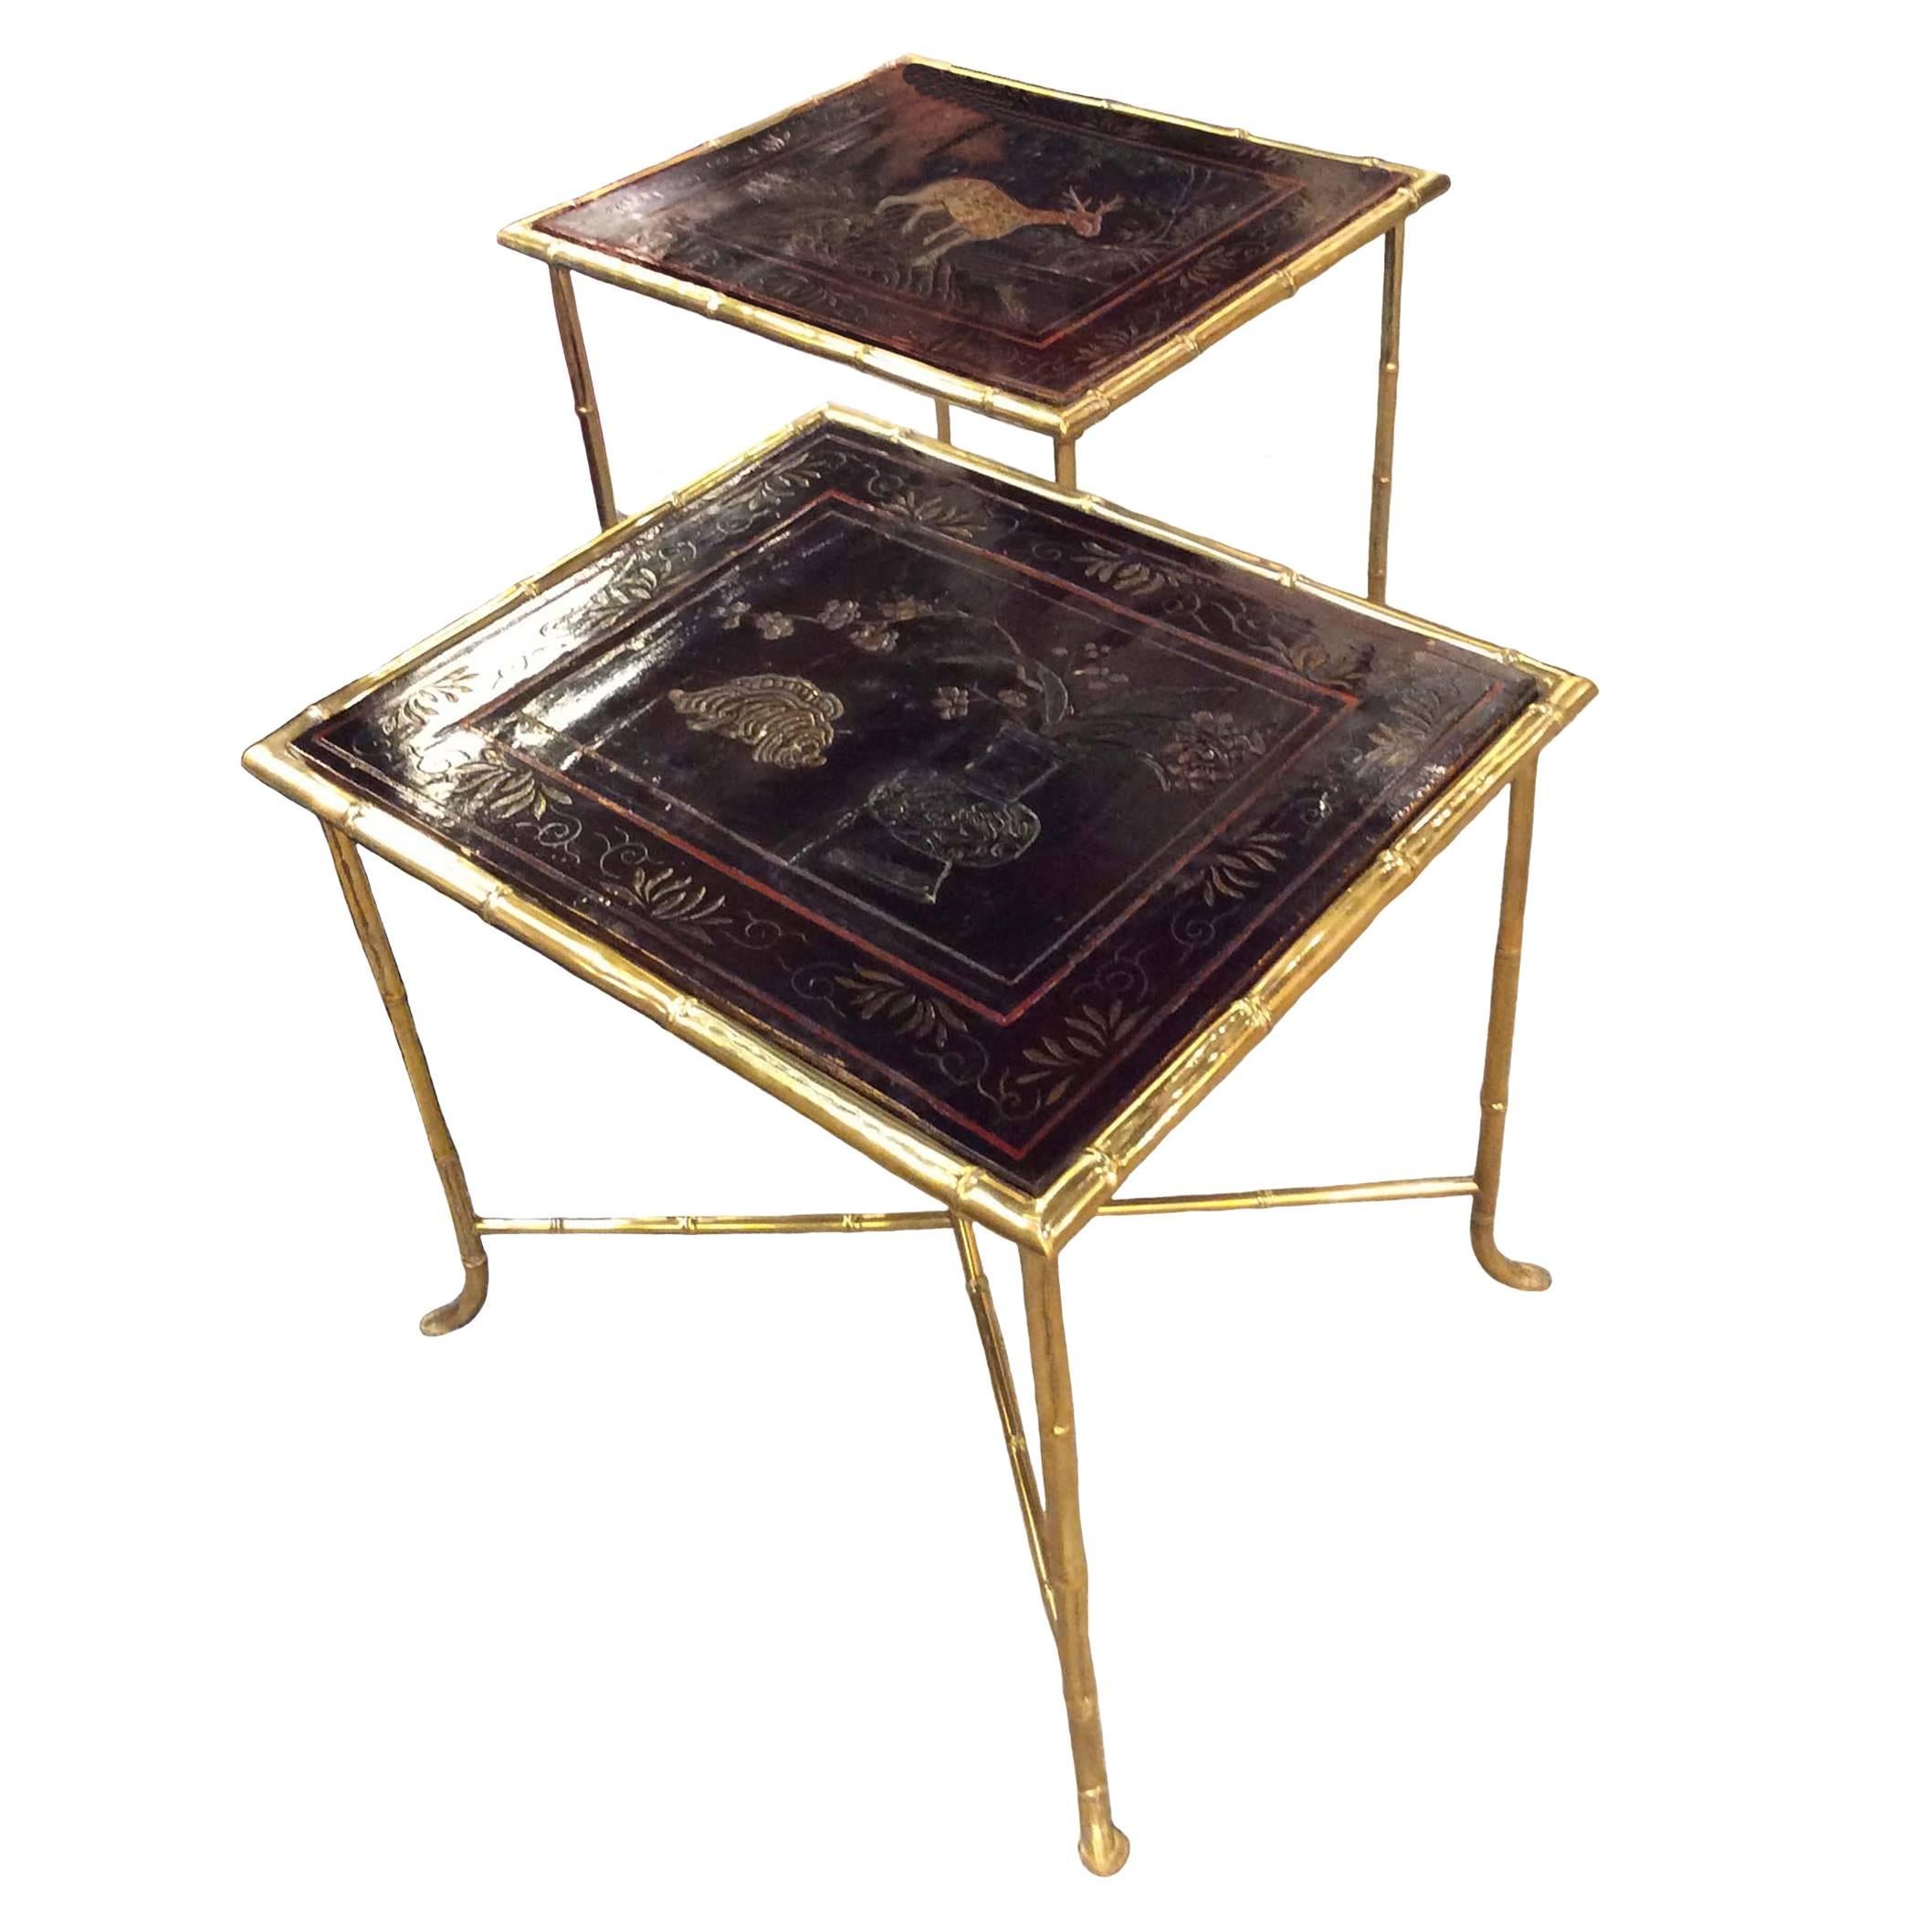 Pair of unique Chinoiserie Lacquer Tables